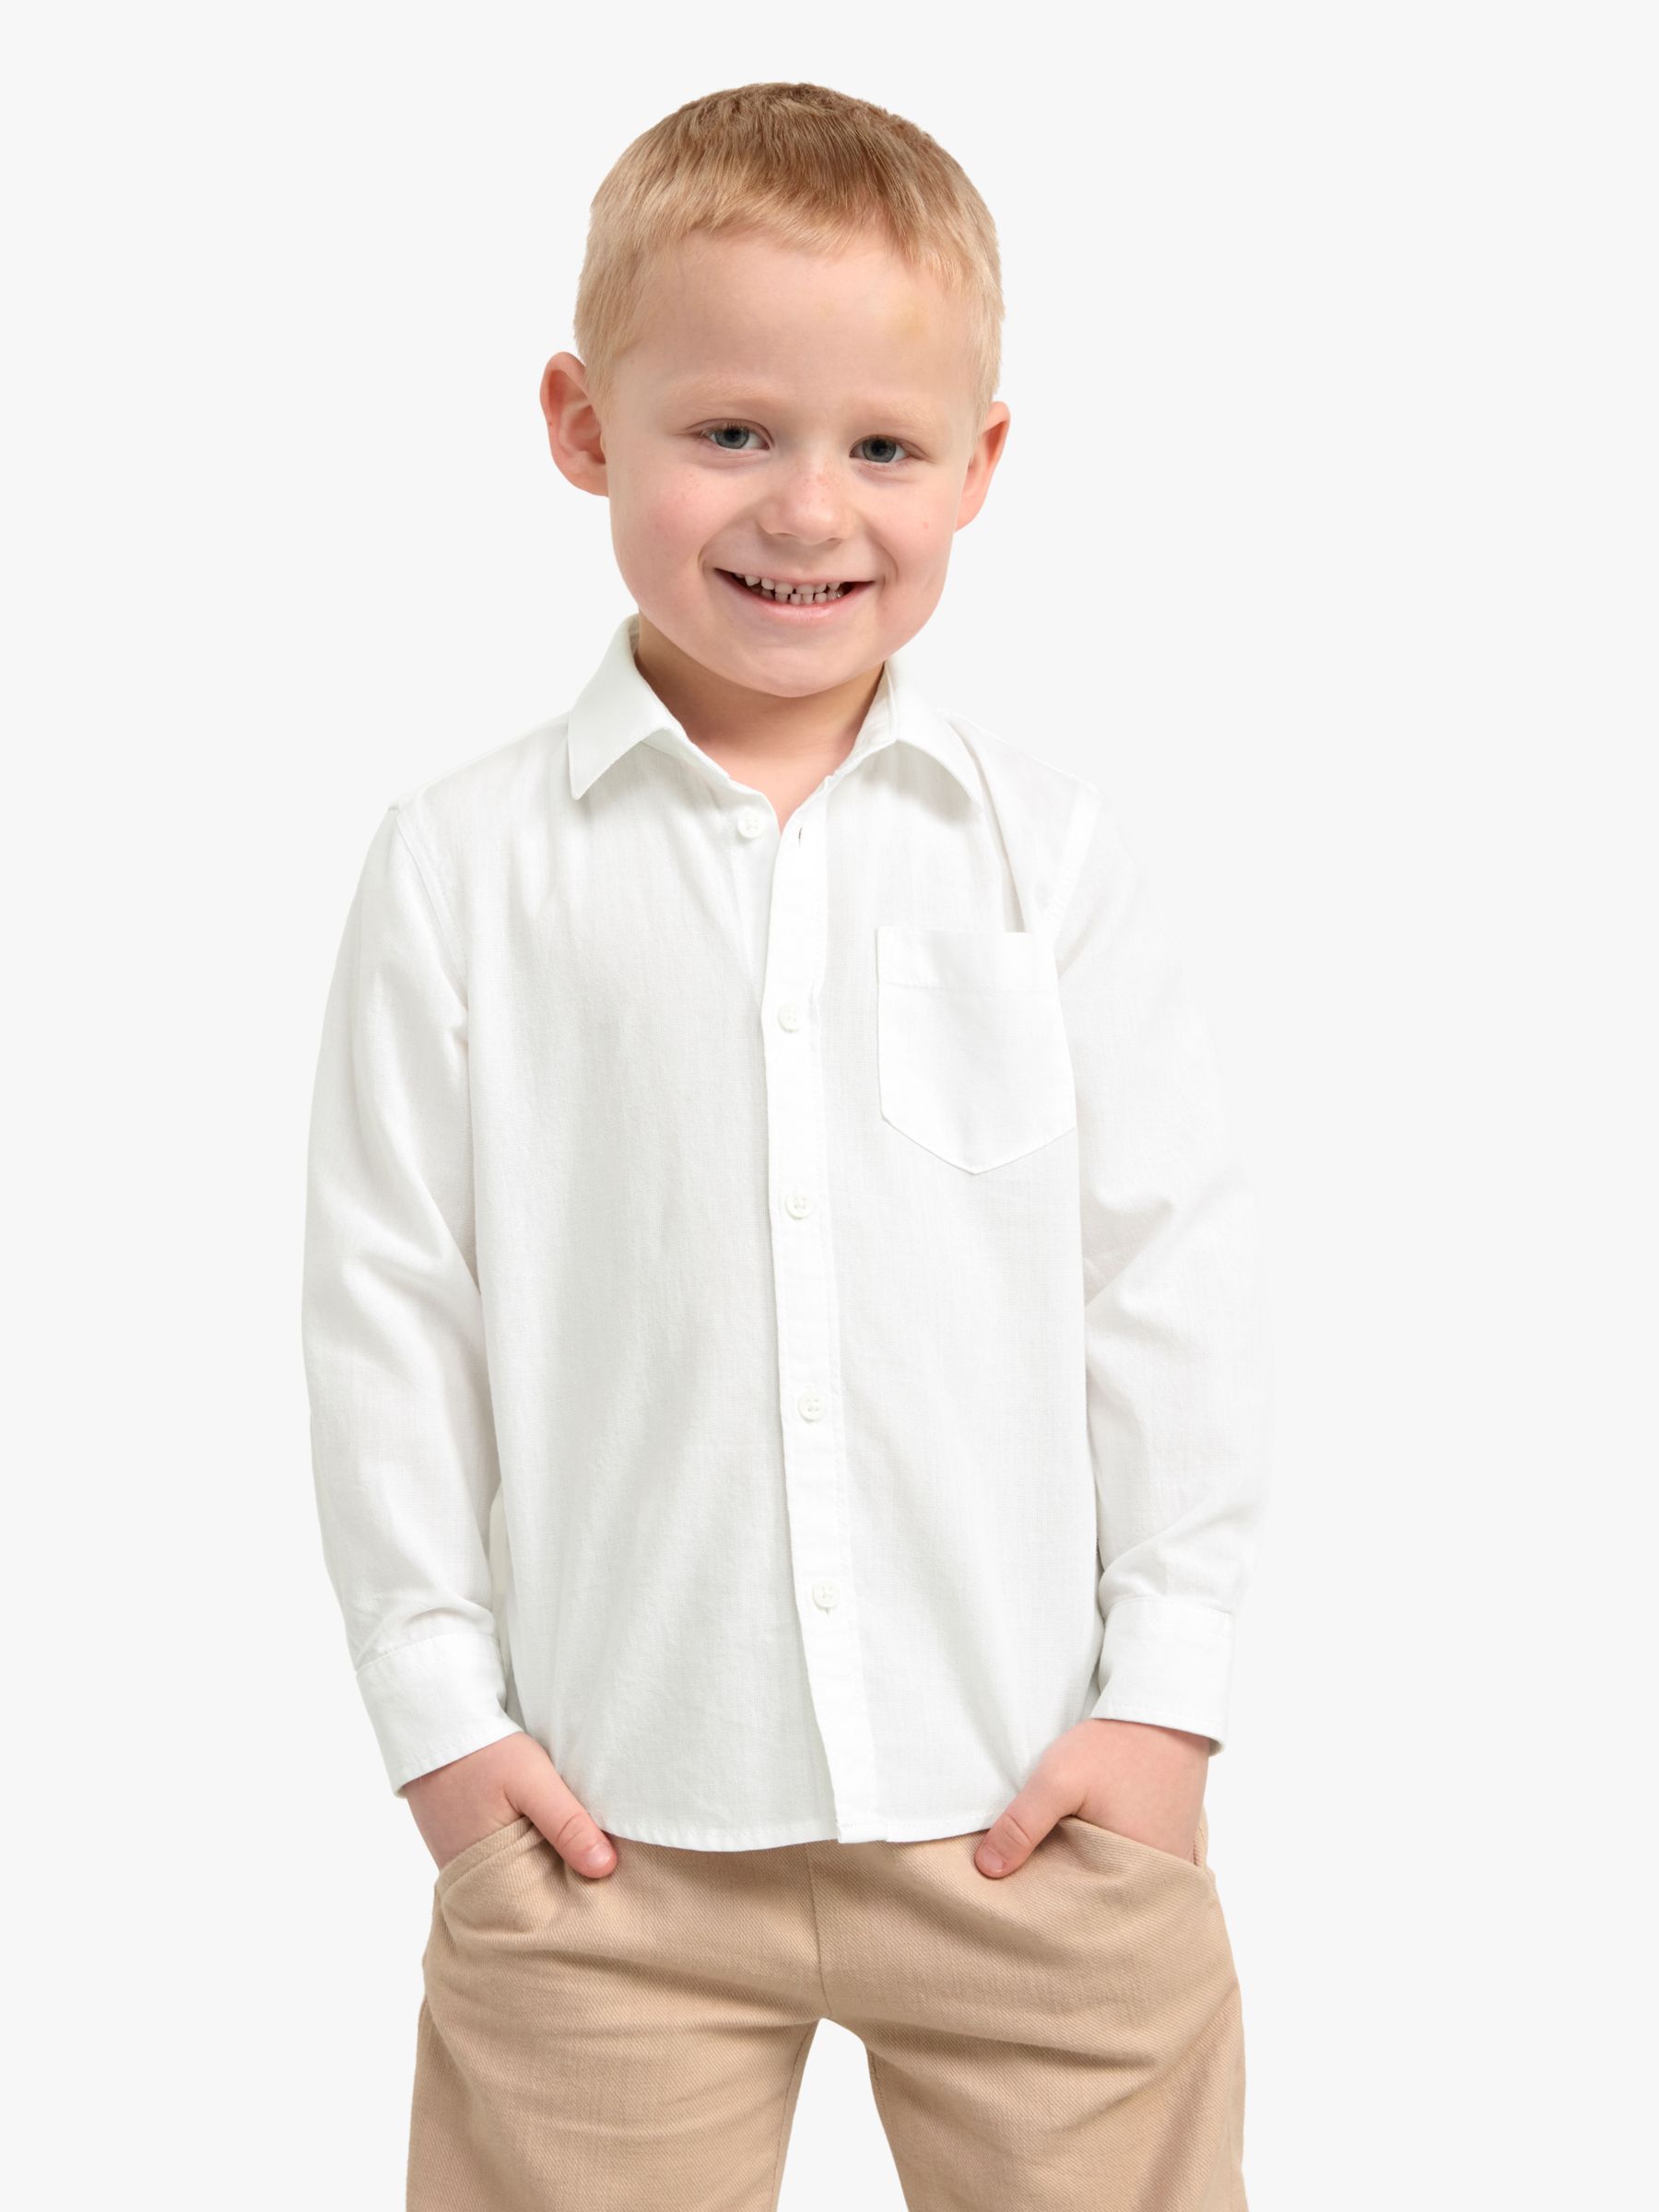 Lindex Kids' Preppy Oxford Long Sleeve Shirt, White, 2 years